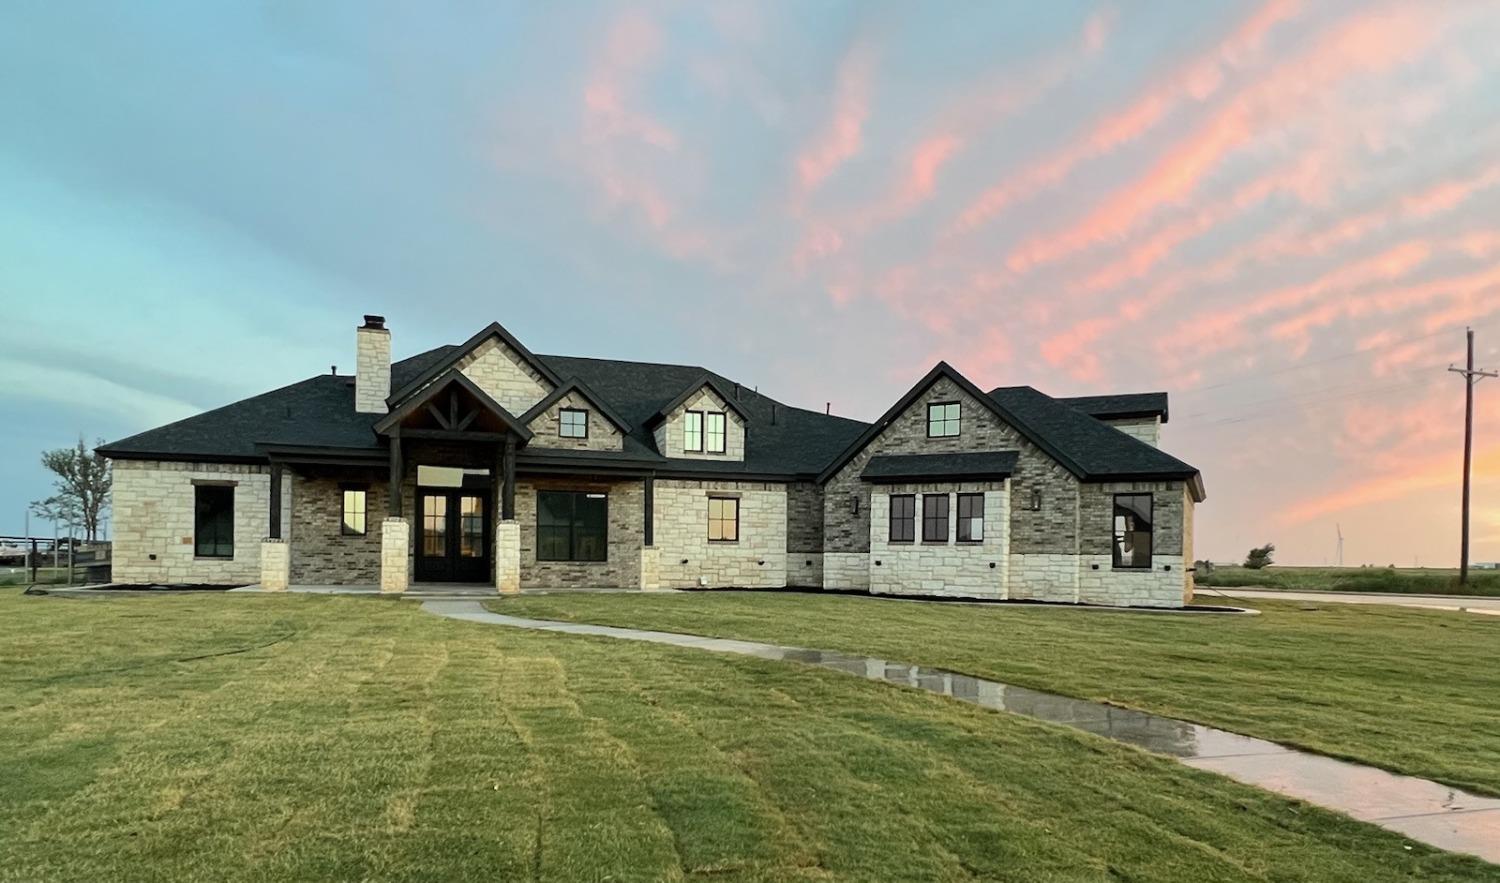 Prestigious Legacy Ranch in academic, award winning Shallowater ISD. Fabulous 4/4/2 4000 sq ft home with a 40x60 insulated shop, bonus room, study, & basement is located on a 1.12 acre lot full of custom features.  *Surround Sound in Living, Basement & Bonus Room *Bonus Room is wired to accommodate 4 TV's *Wired for alarm system, security cameras, & Wi-Fi access points *CAT6 data *High-end Windsor Windows *Custom Ceilings *2 Refrigerators *Double Oven *Gas Cook Top *RO in Kitchen *Ice Machine *2 HVAC units *2 40 gallon Water Heaters *Murphy Bed in Study *ALL Interior Walls Insulated *Wood Floors *Hidden Gun Closet *Basement has custom bar, built in microwave, and refrigerator *Top of the line outdoor kitchen and fireplace The 40 X 60 shop has the following custom features: *14FT sides, 16FT center *Insulated *Full Bathroom *Washer/Dryer Hookups *RV Hookups *20X20 Loft *Water Softener *Water Heater *10x14 Door *10x10 Door *Separate Septic. Come see this AMAZING PROPERTY!! No HOA FEES!!!